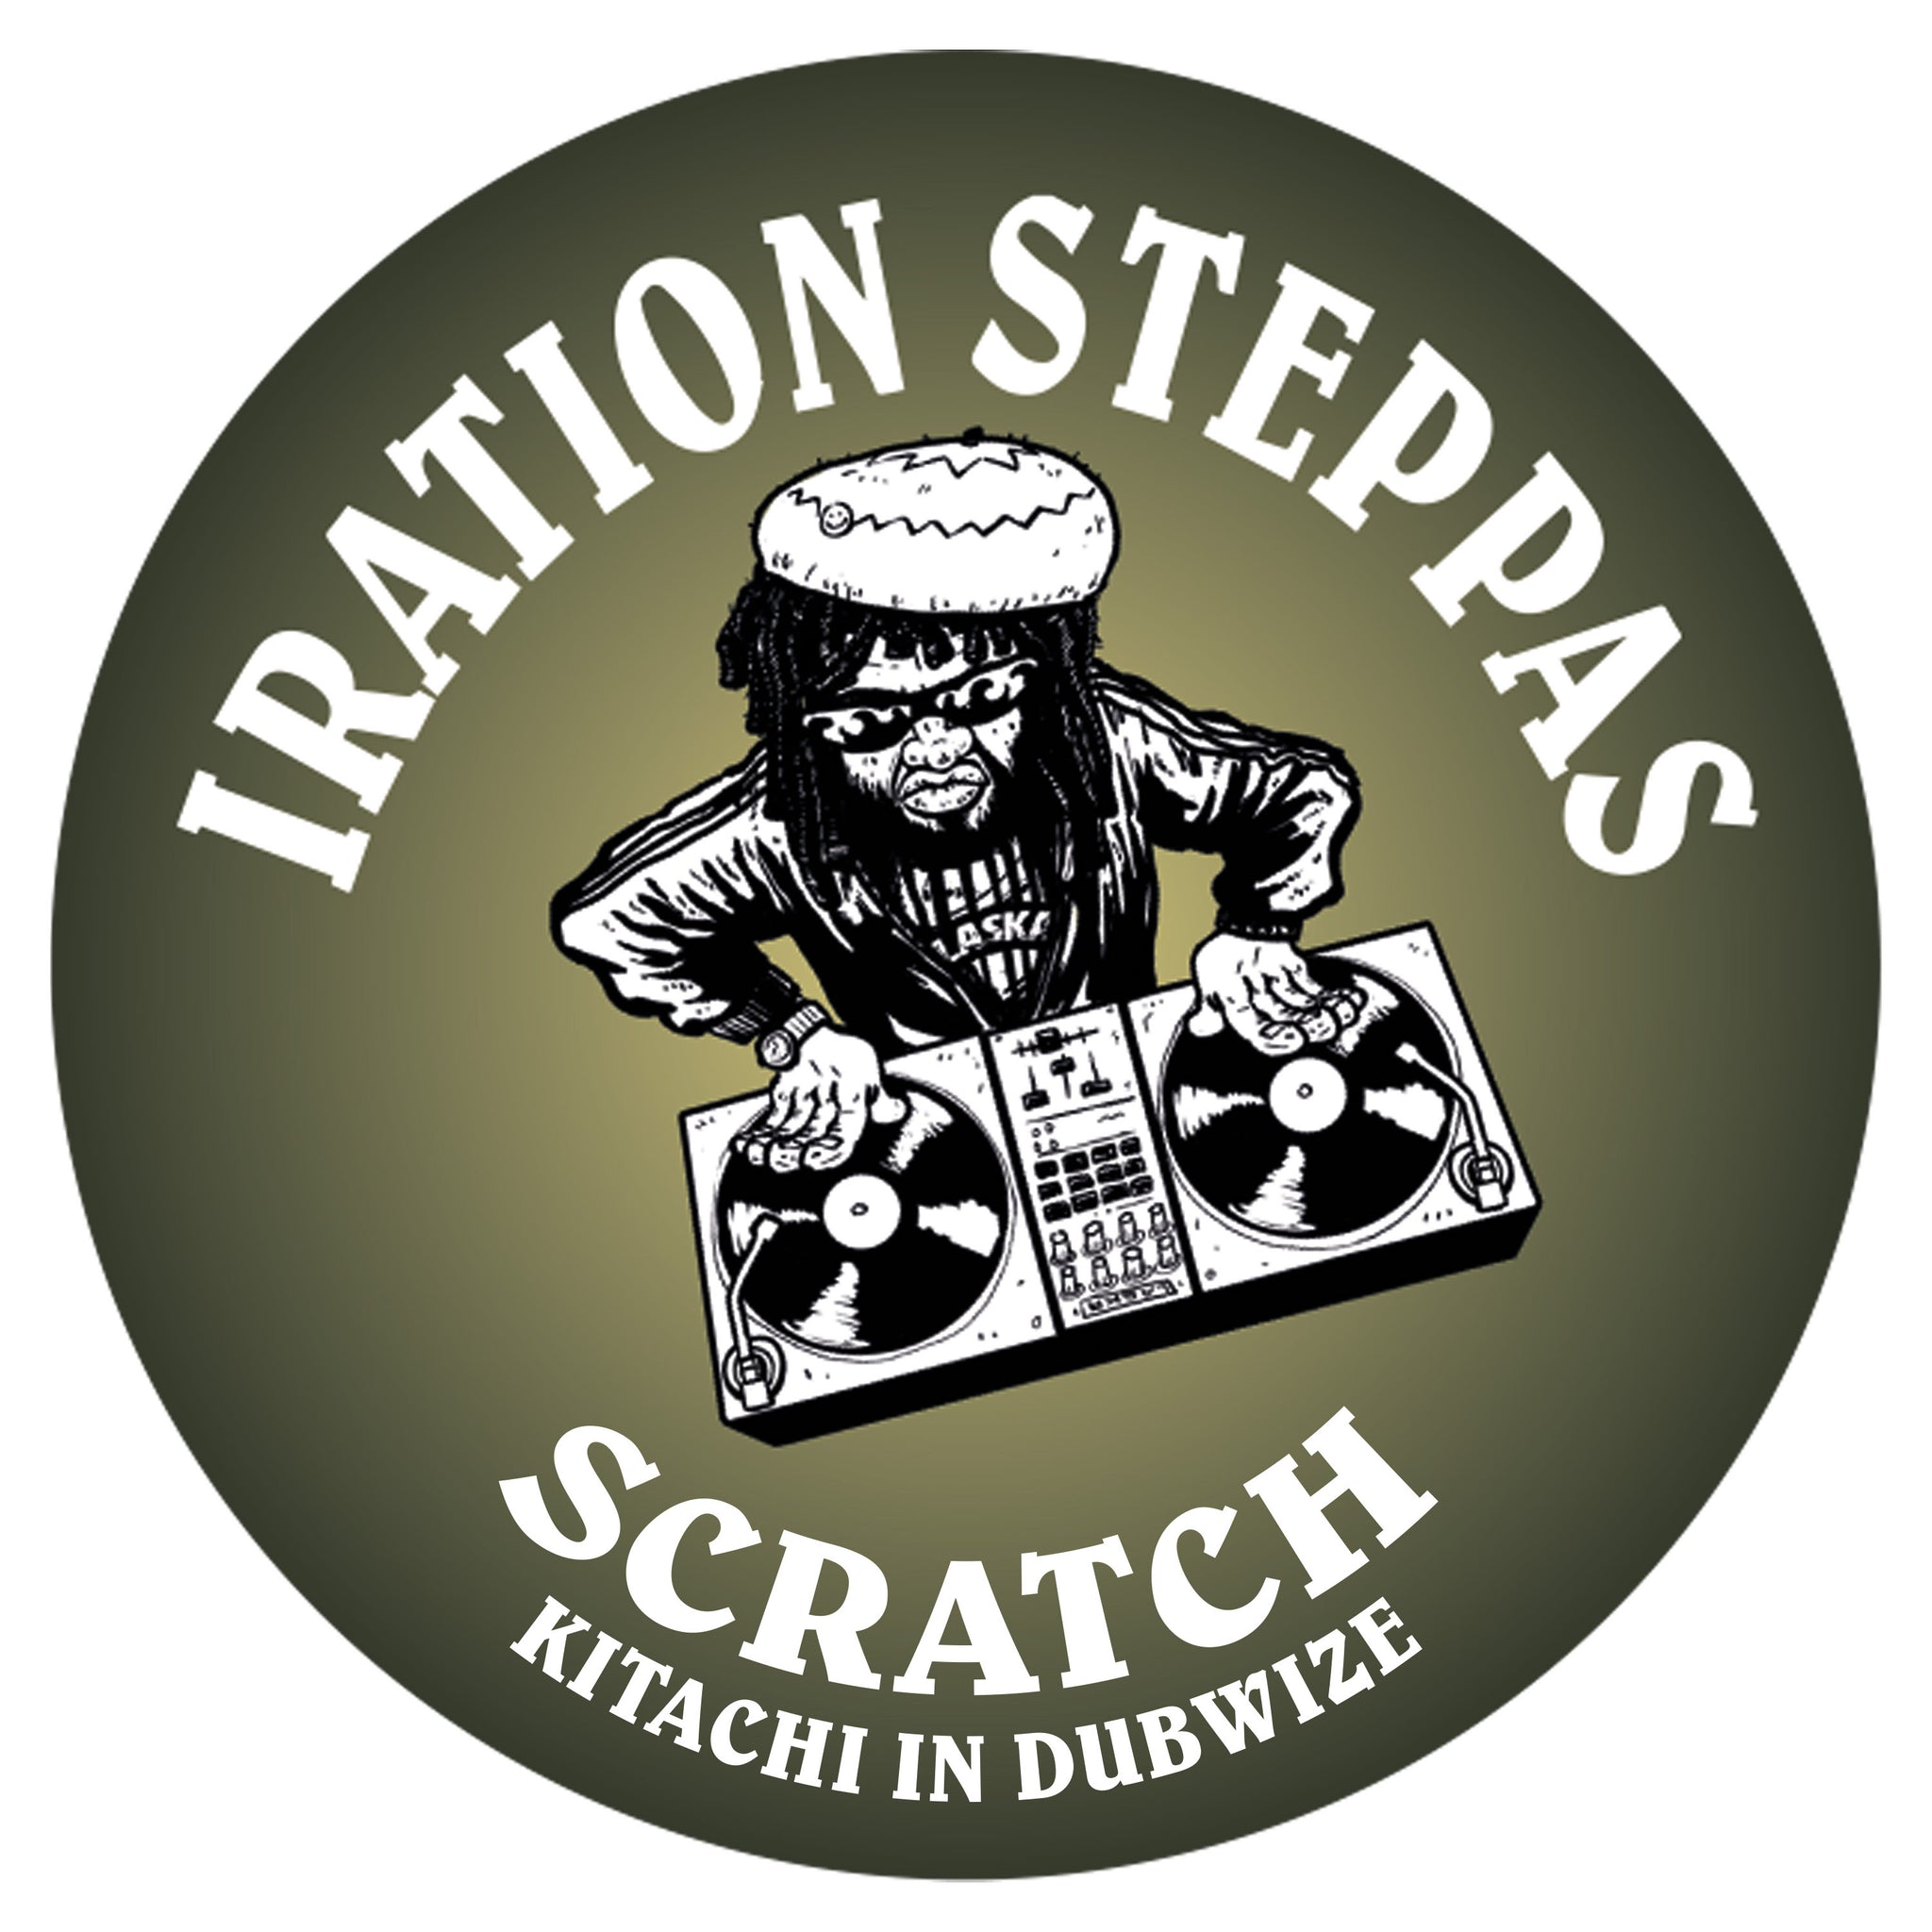 Iration Steppas - Scratch (Kitachi In Dubwise)